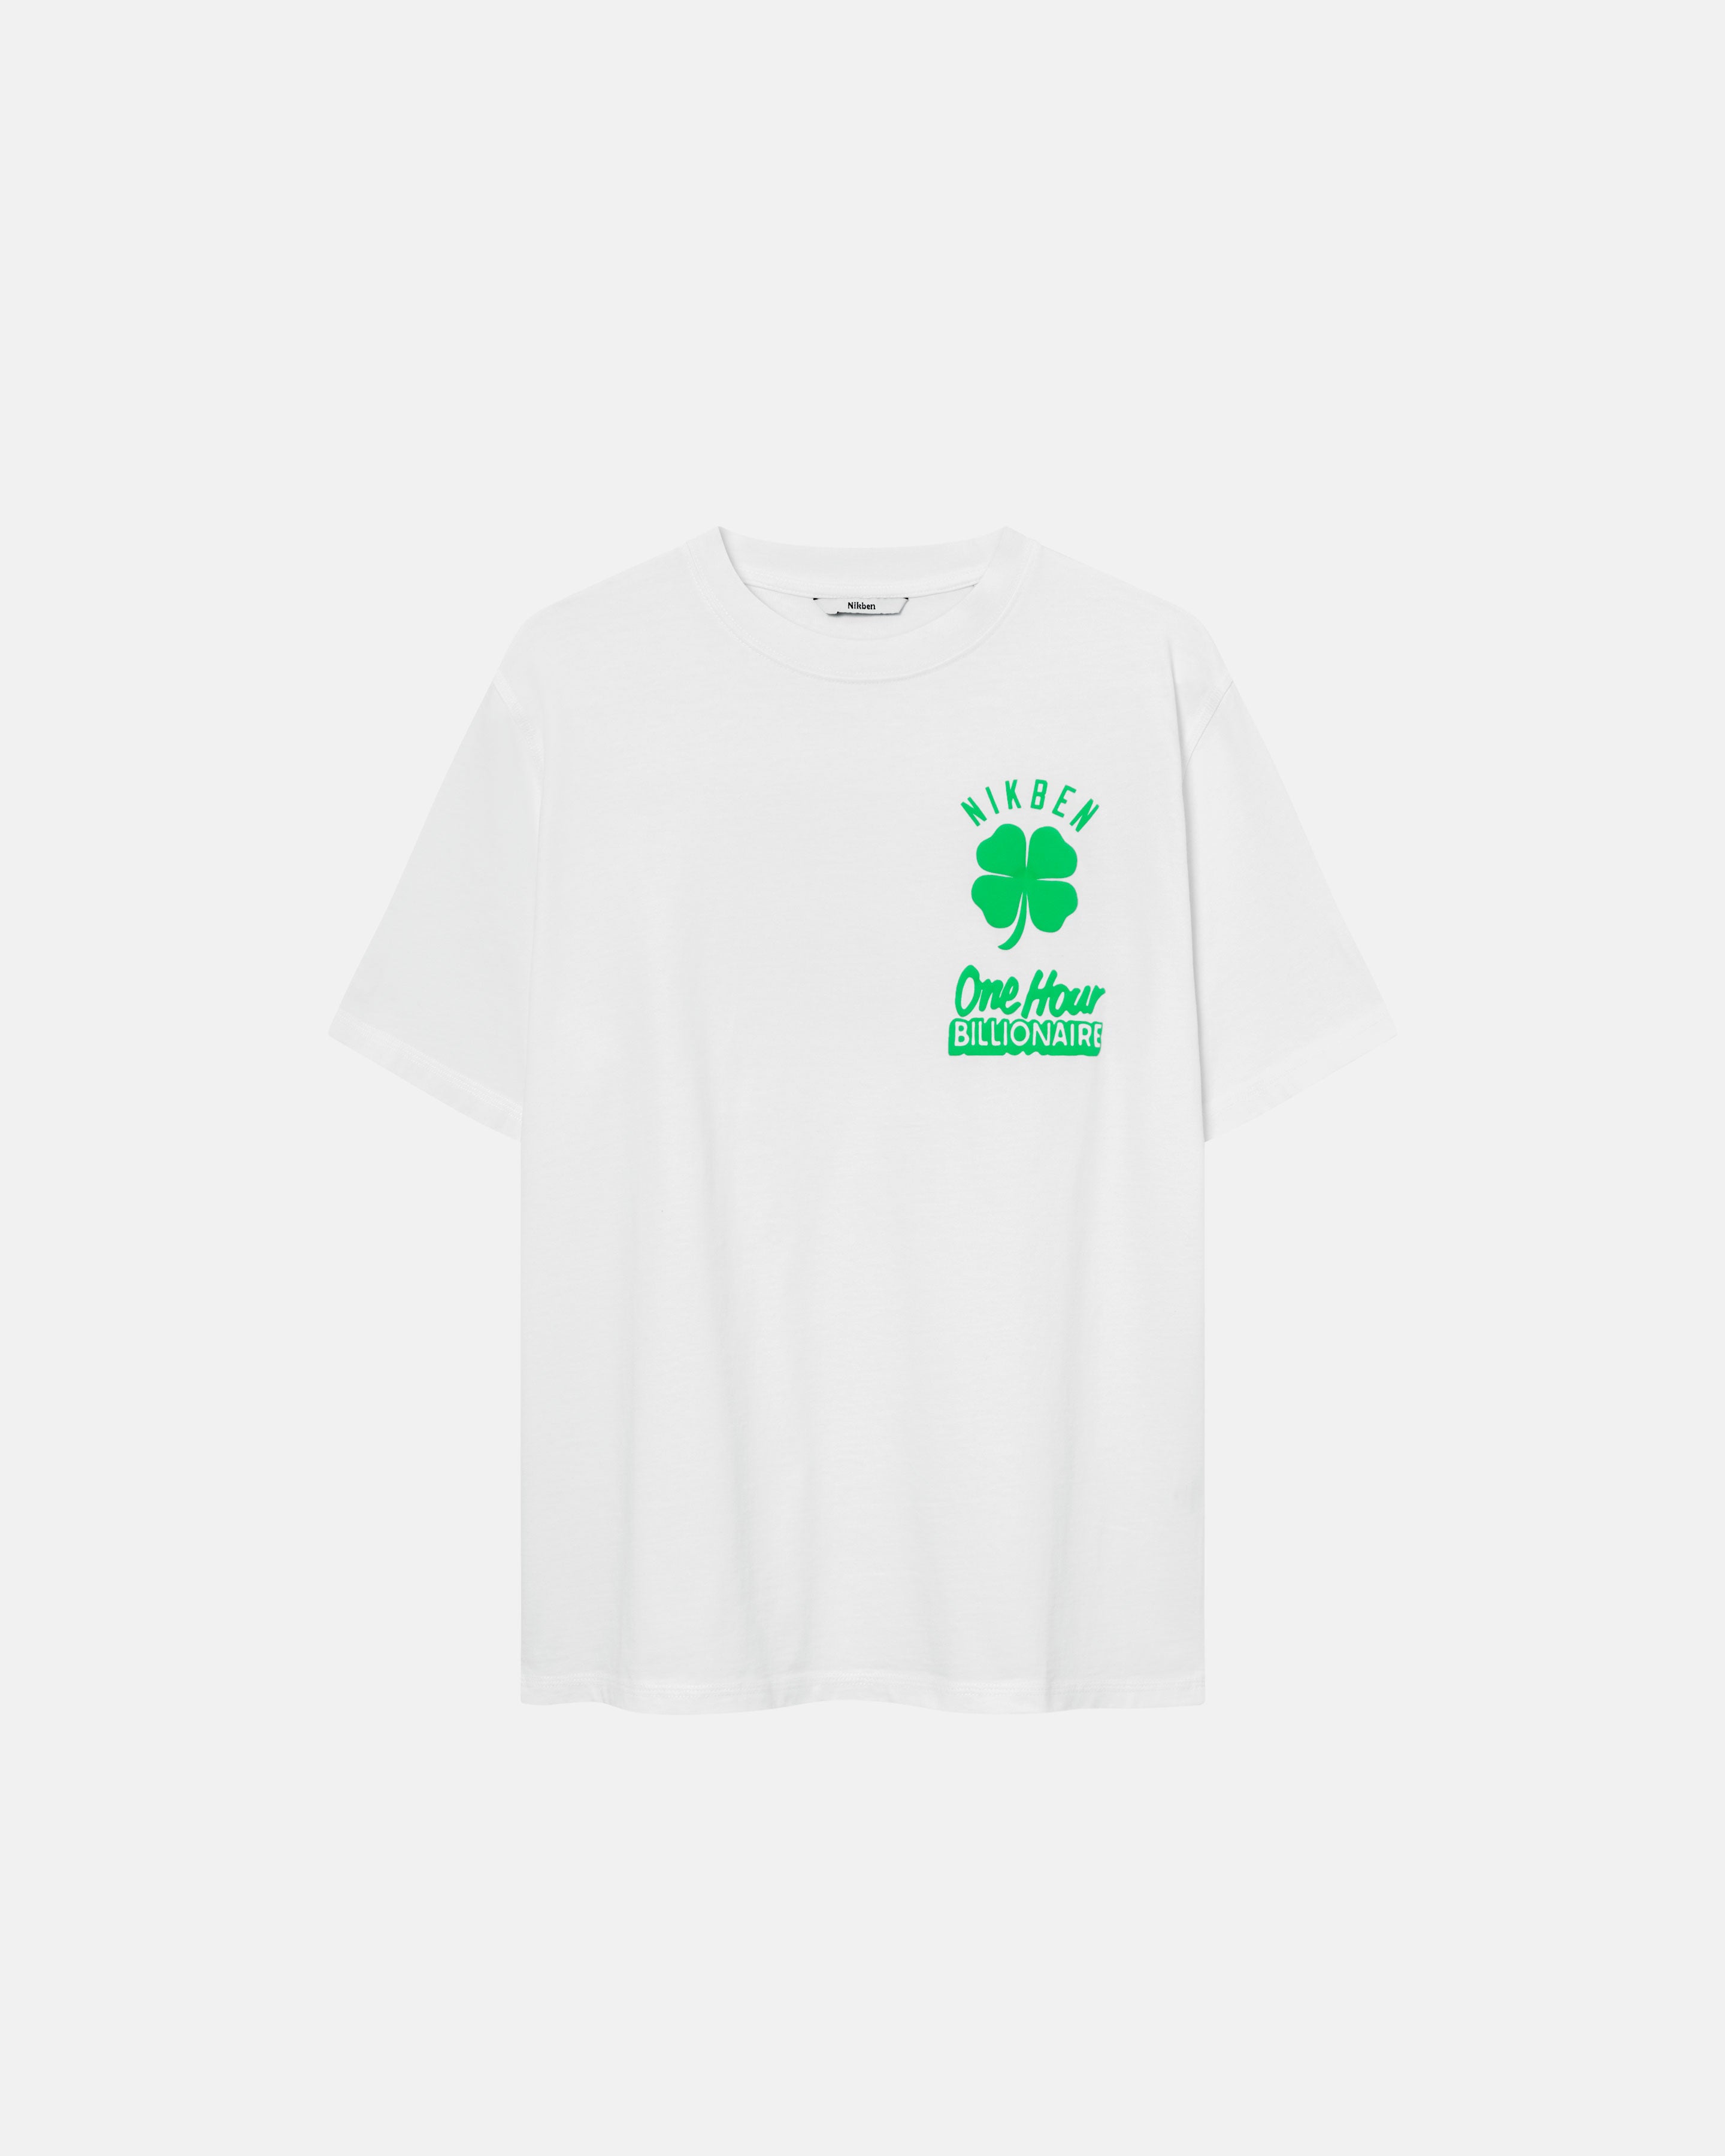 White t-shirt with a green clover print and the text 